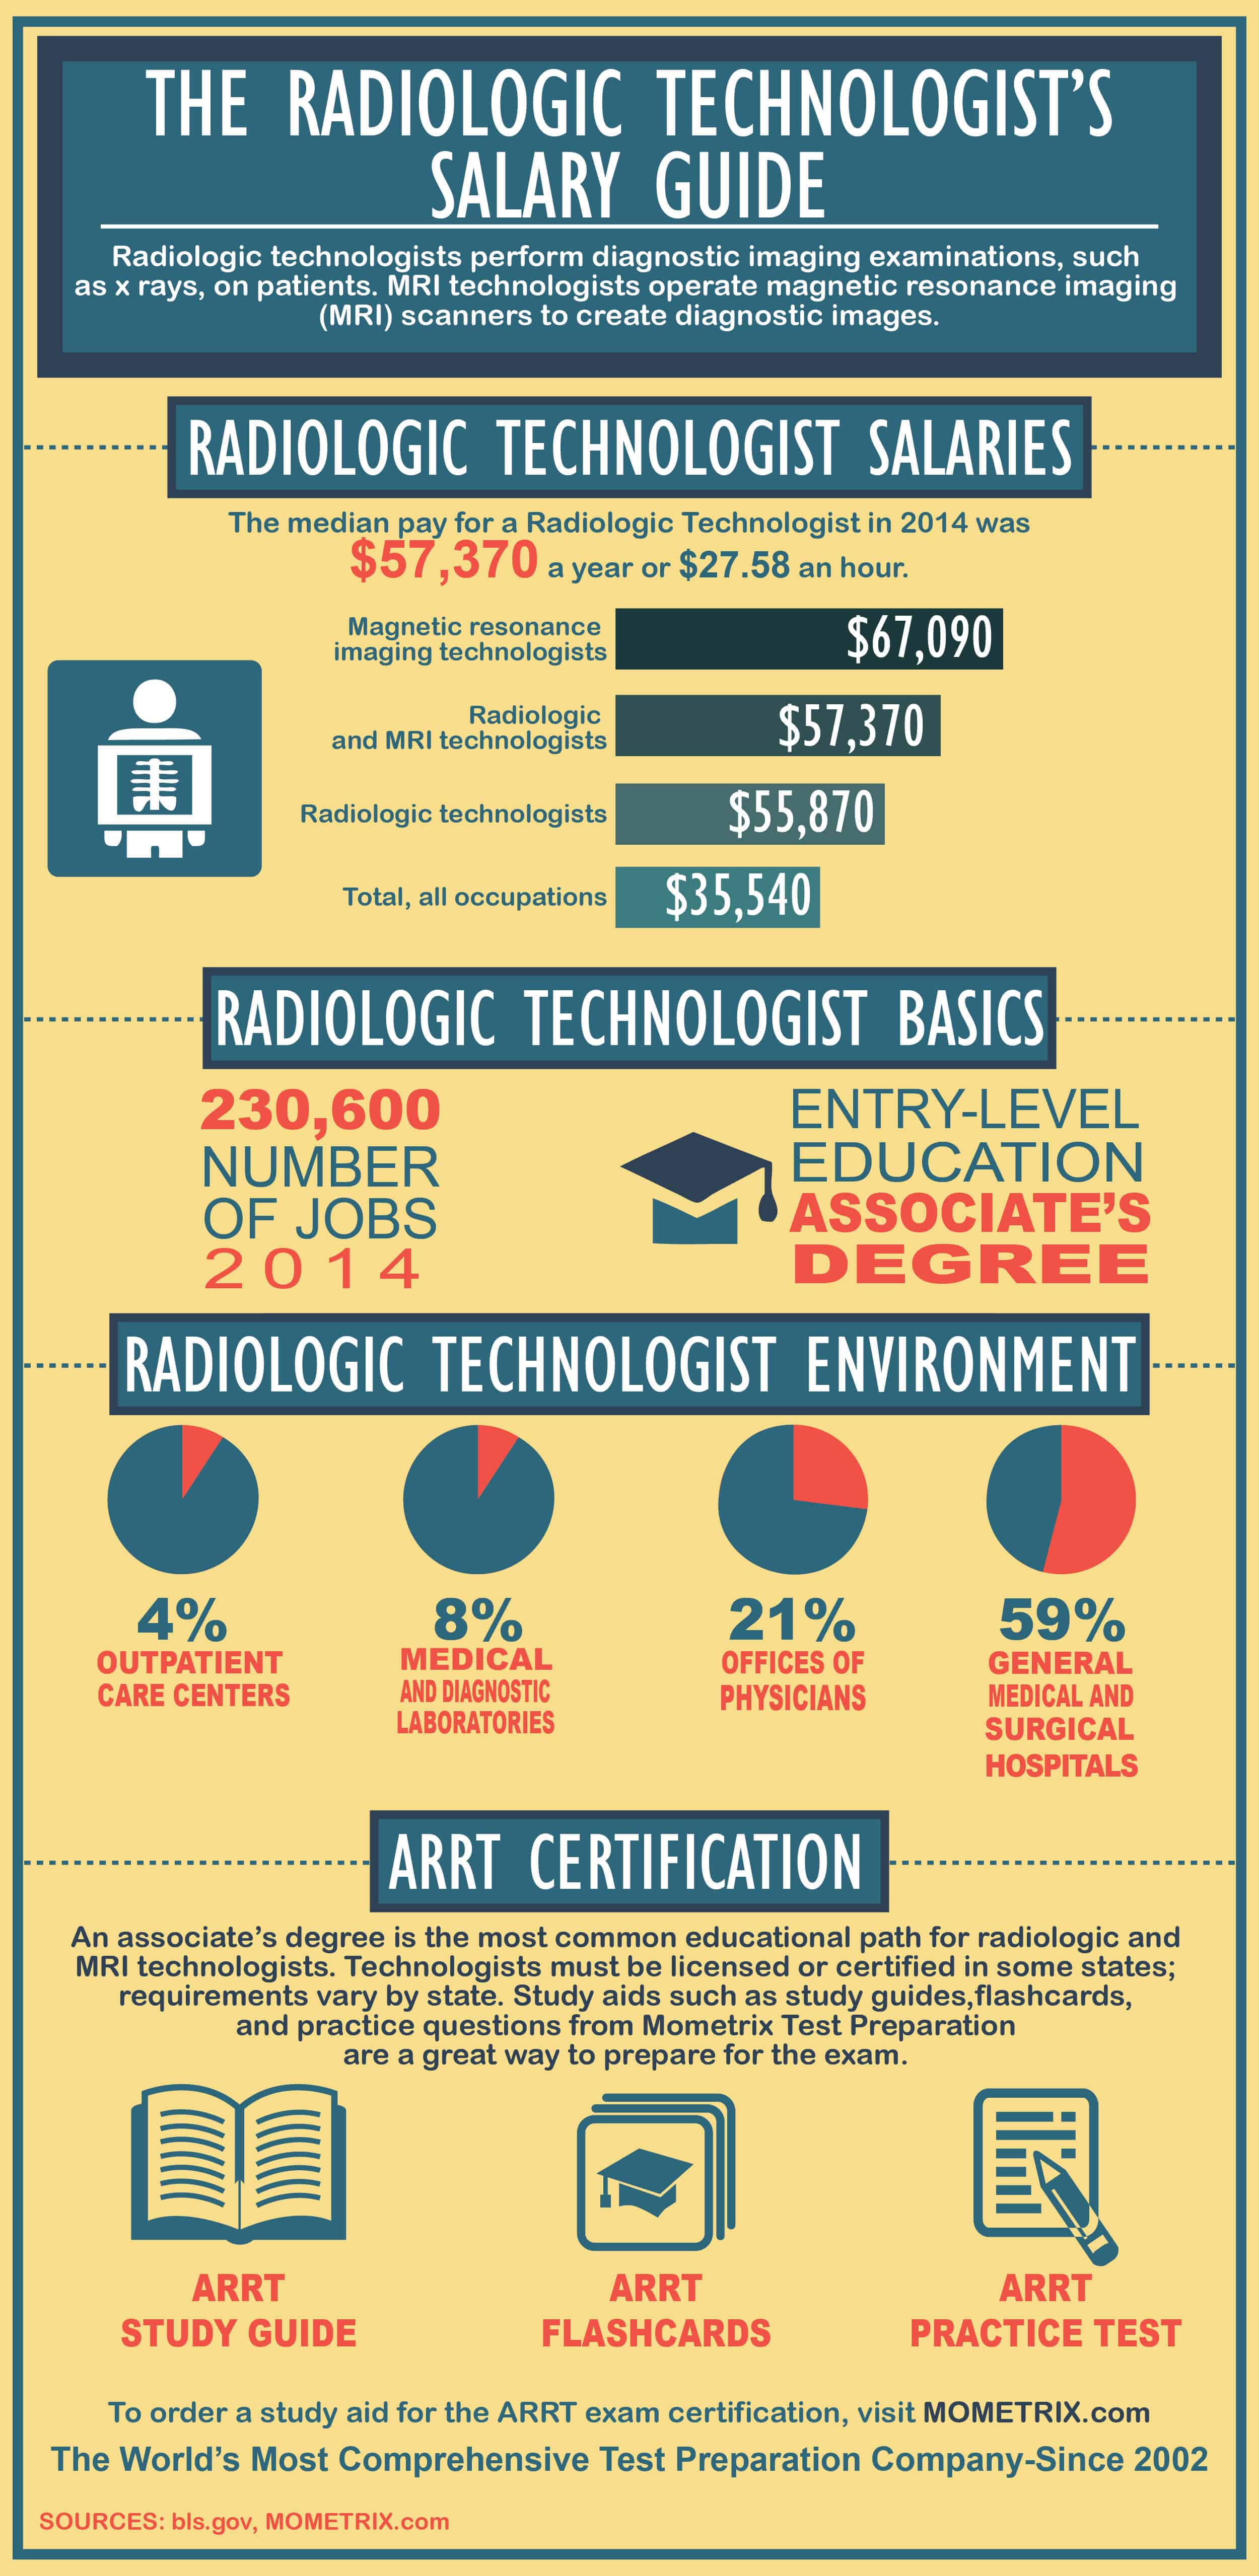 2014 Radiologic Technologist Salary Guide: Radiologic technologists, also known as radiographers, perform diagnostic imaging examinations, such as x rays, on patients. 